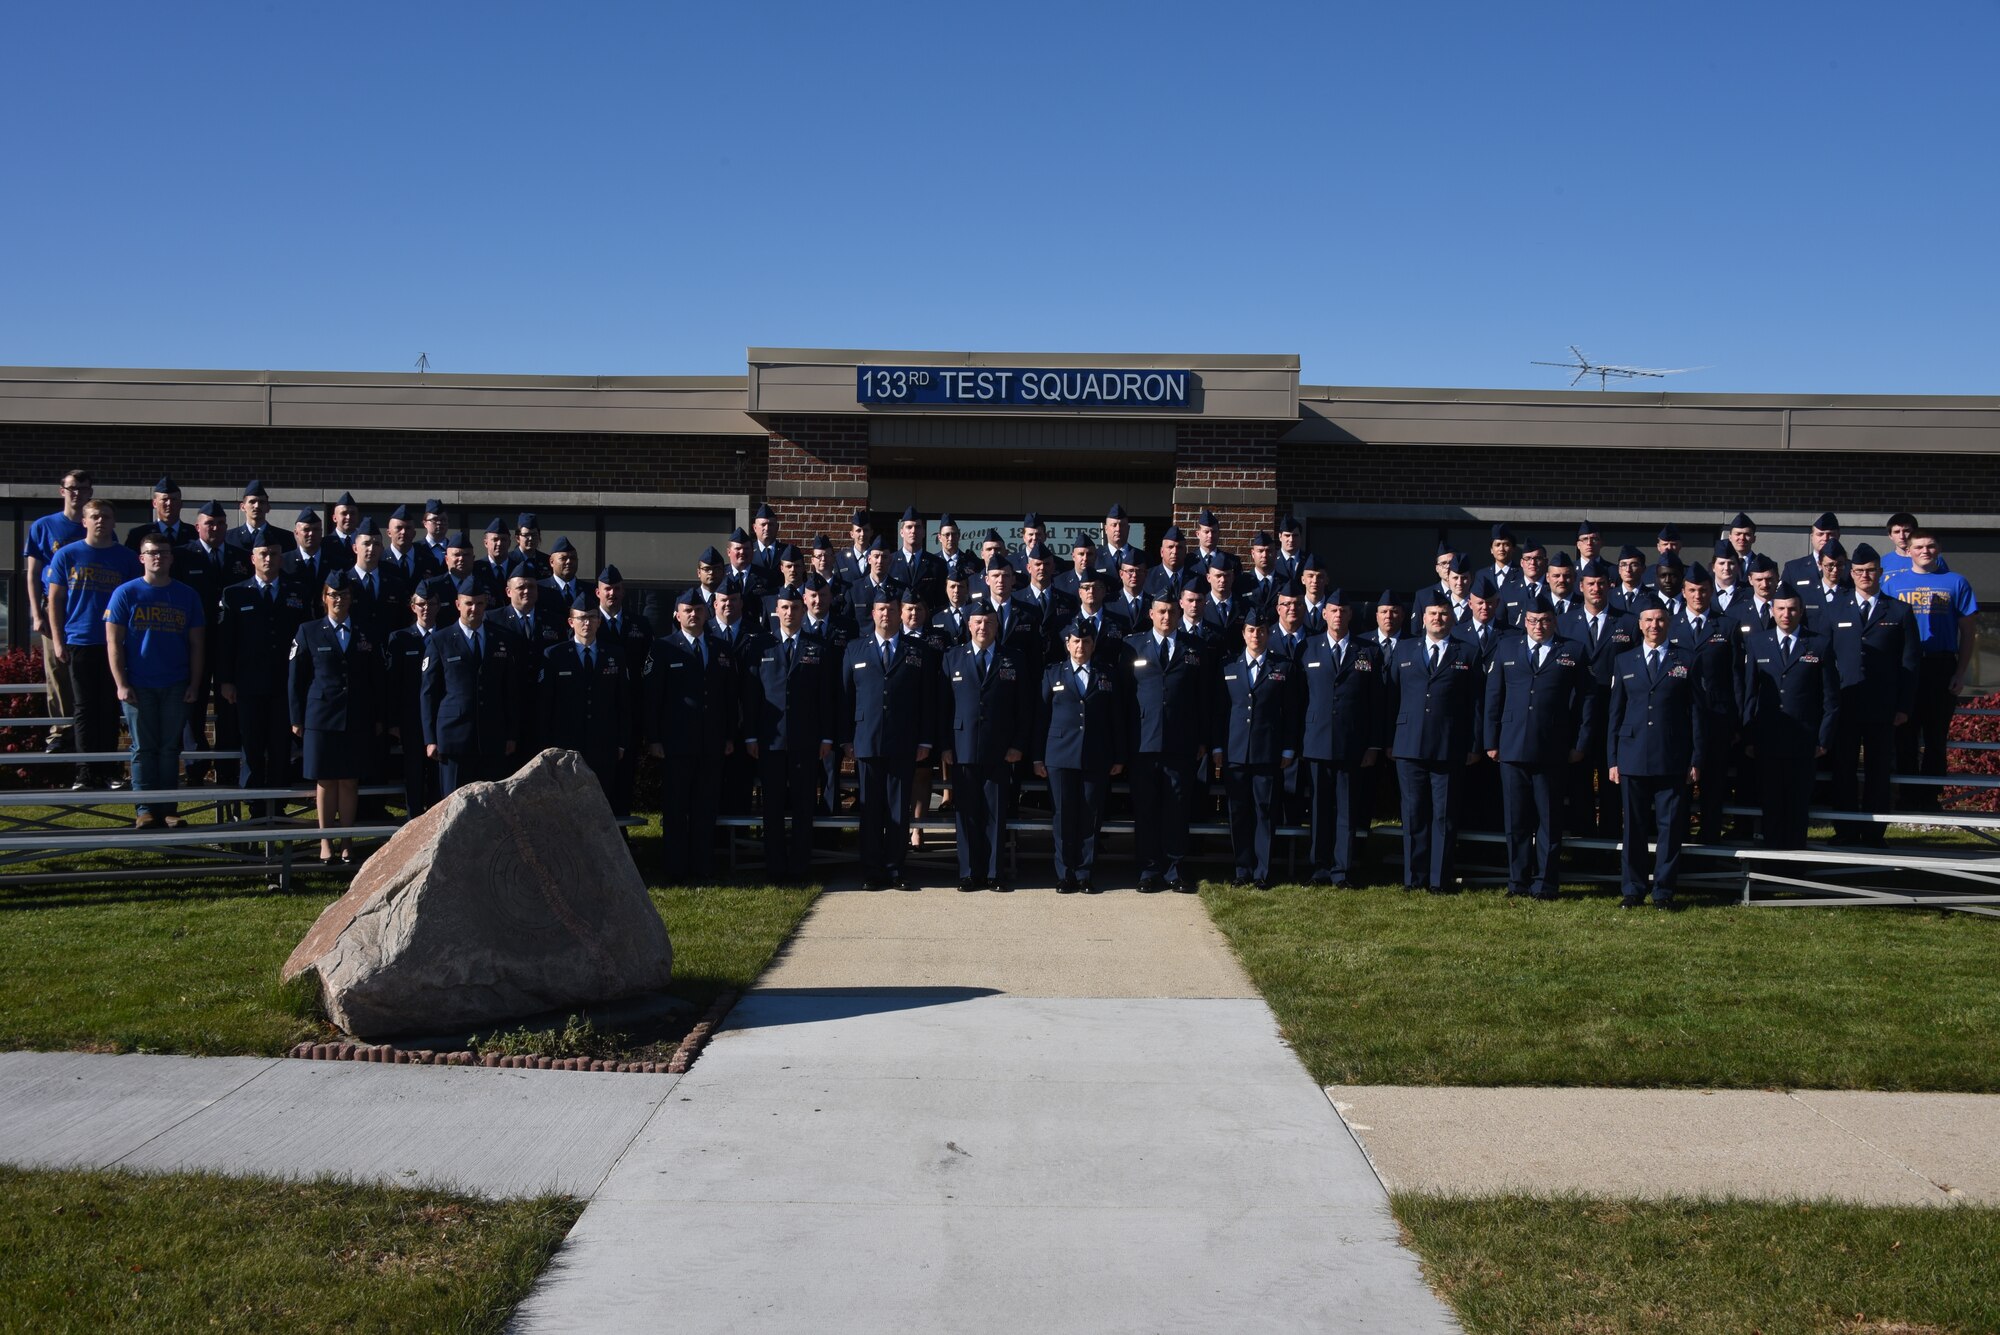 Airmen of the 133rd Test Squadron pose for a photo